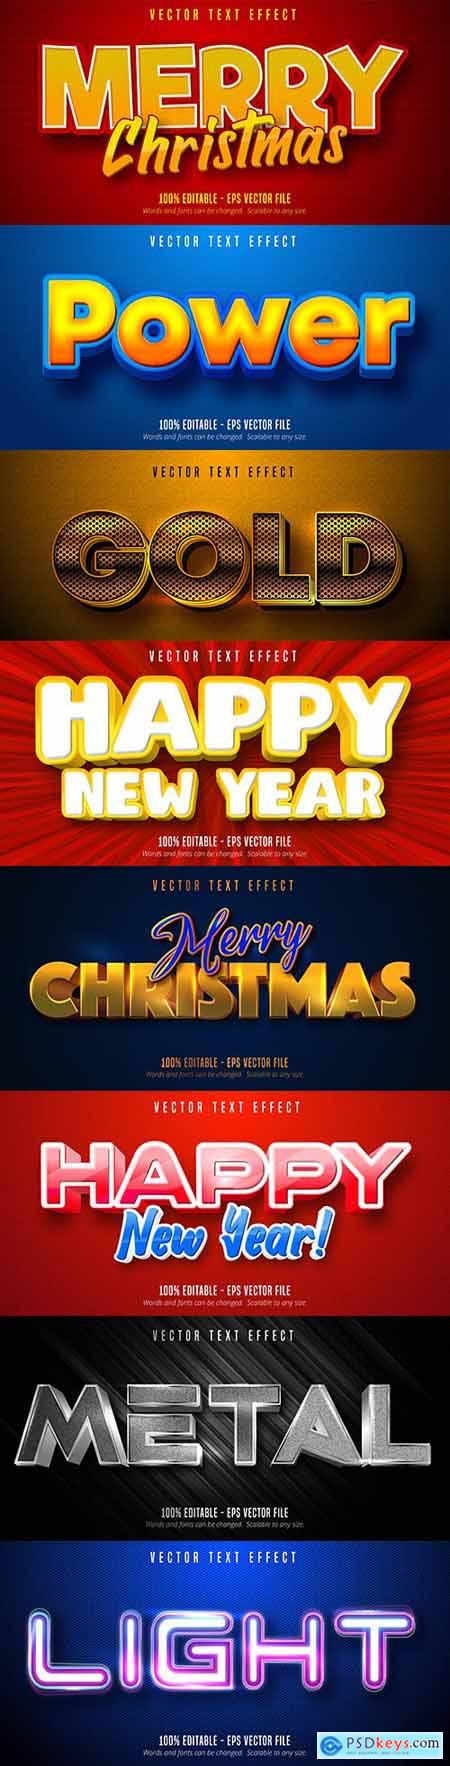 Merry Christmas editable font effect text collection illustration design 2